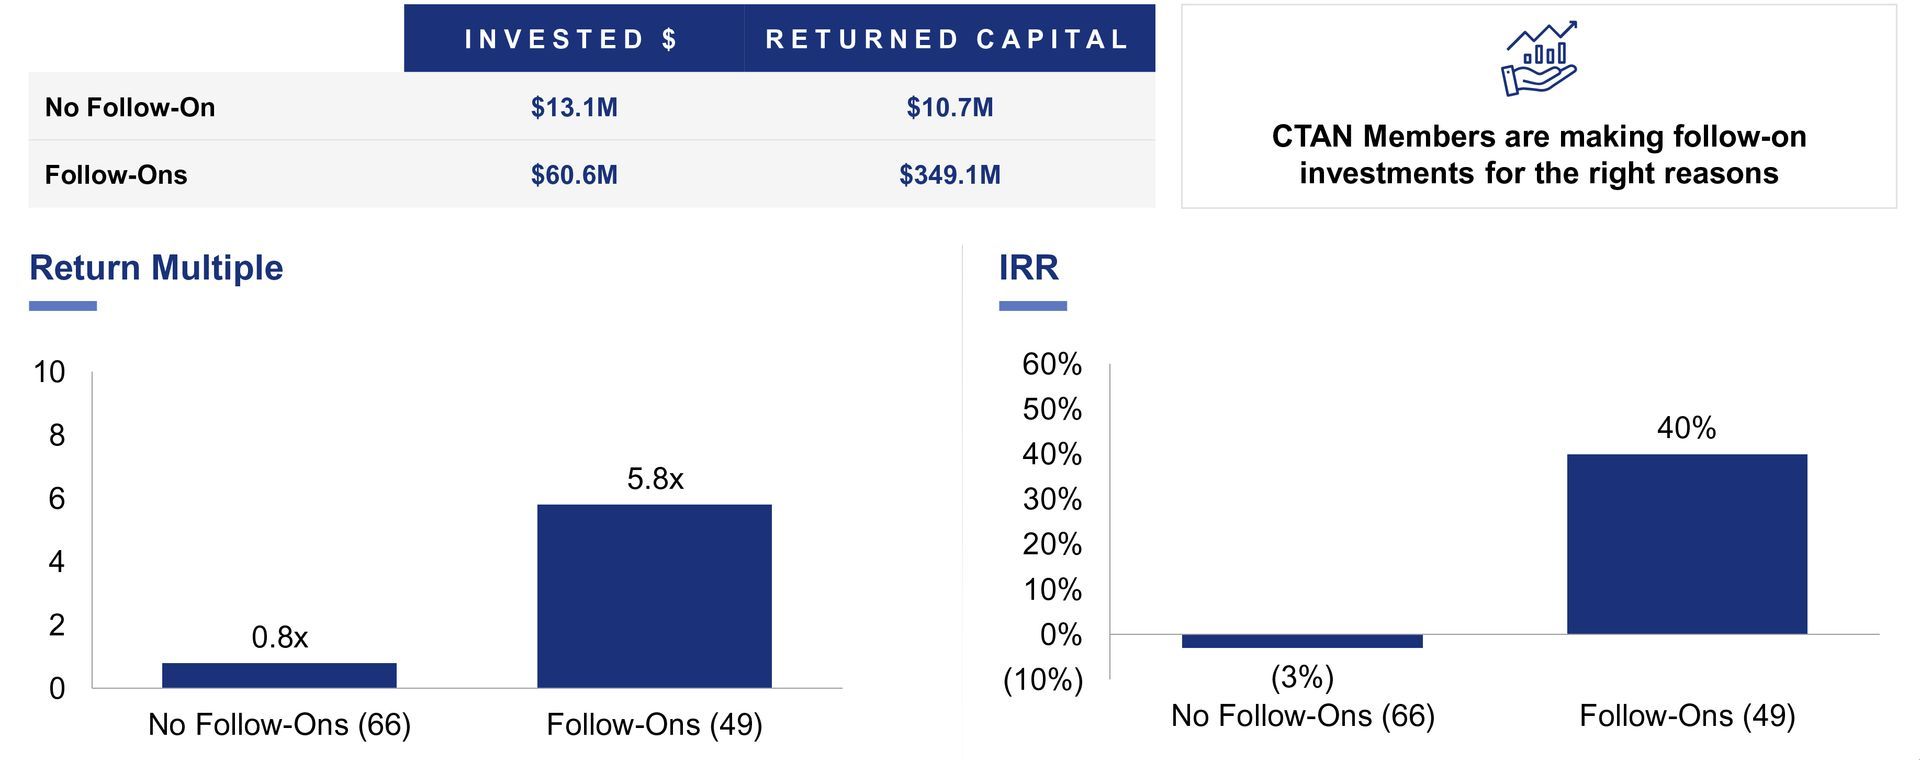 Exits and Out of Business Companies
Single Investment Vs. Multiple Investments (Follow-On)